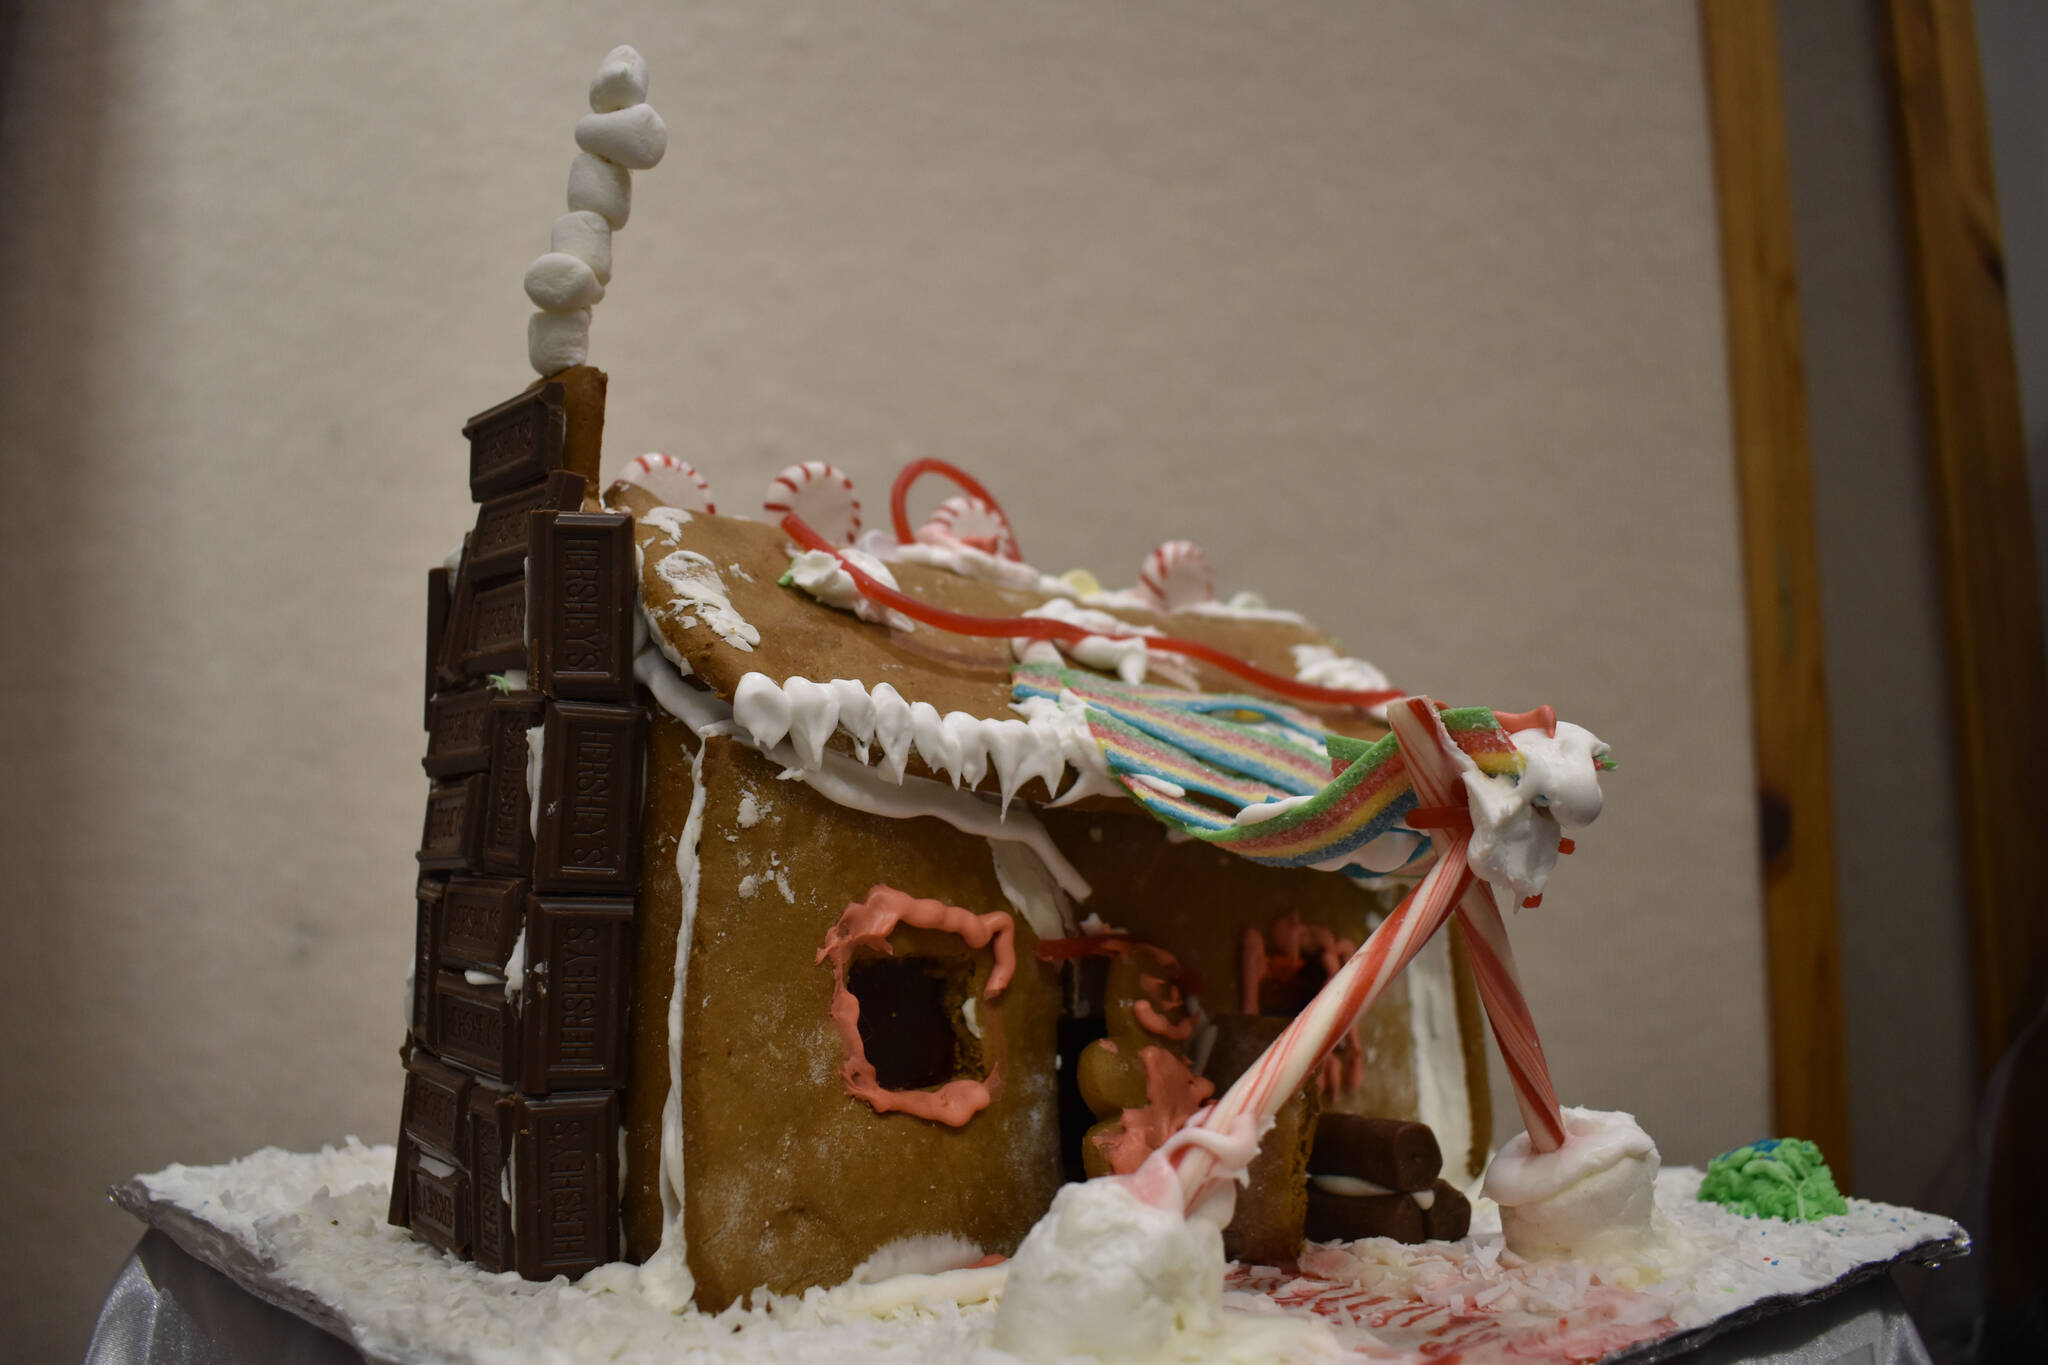 A gingerbread house designed by Charis is displayed at the Kenai Chamber of Commerce and Visitor Center on Tuesday, Dec. 6, 2022. (Jake Dye/Peninsula Clarion)